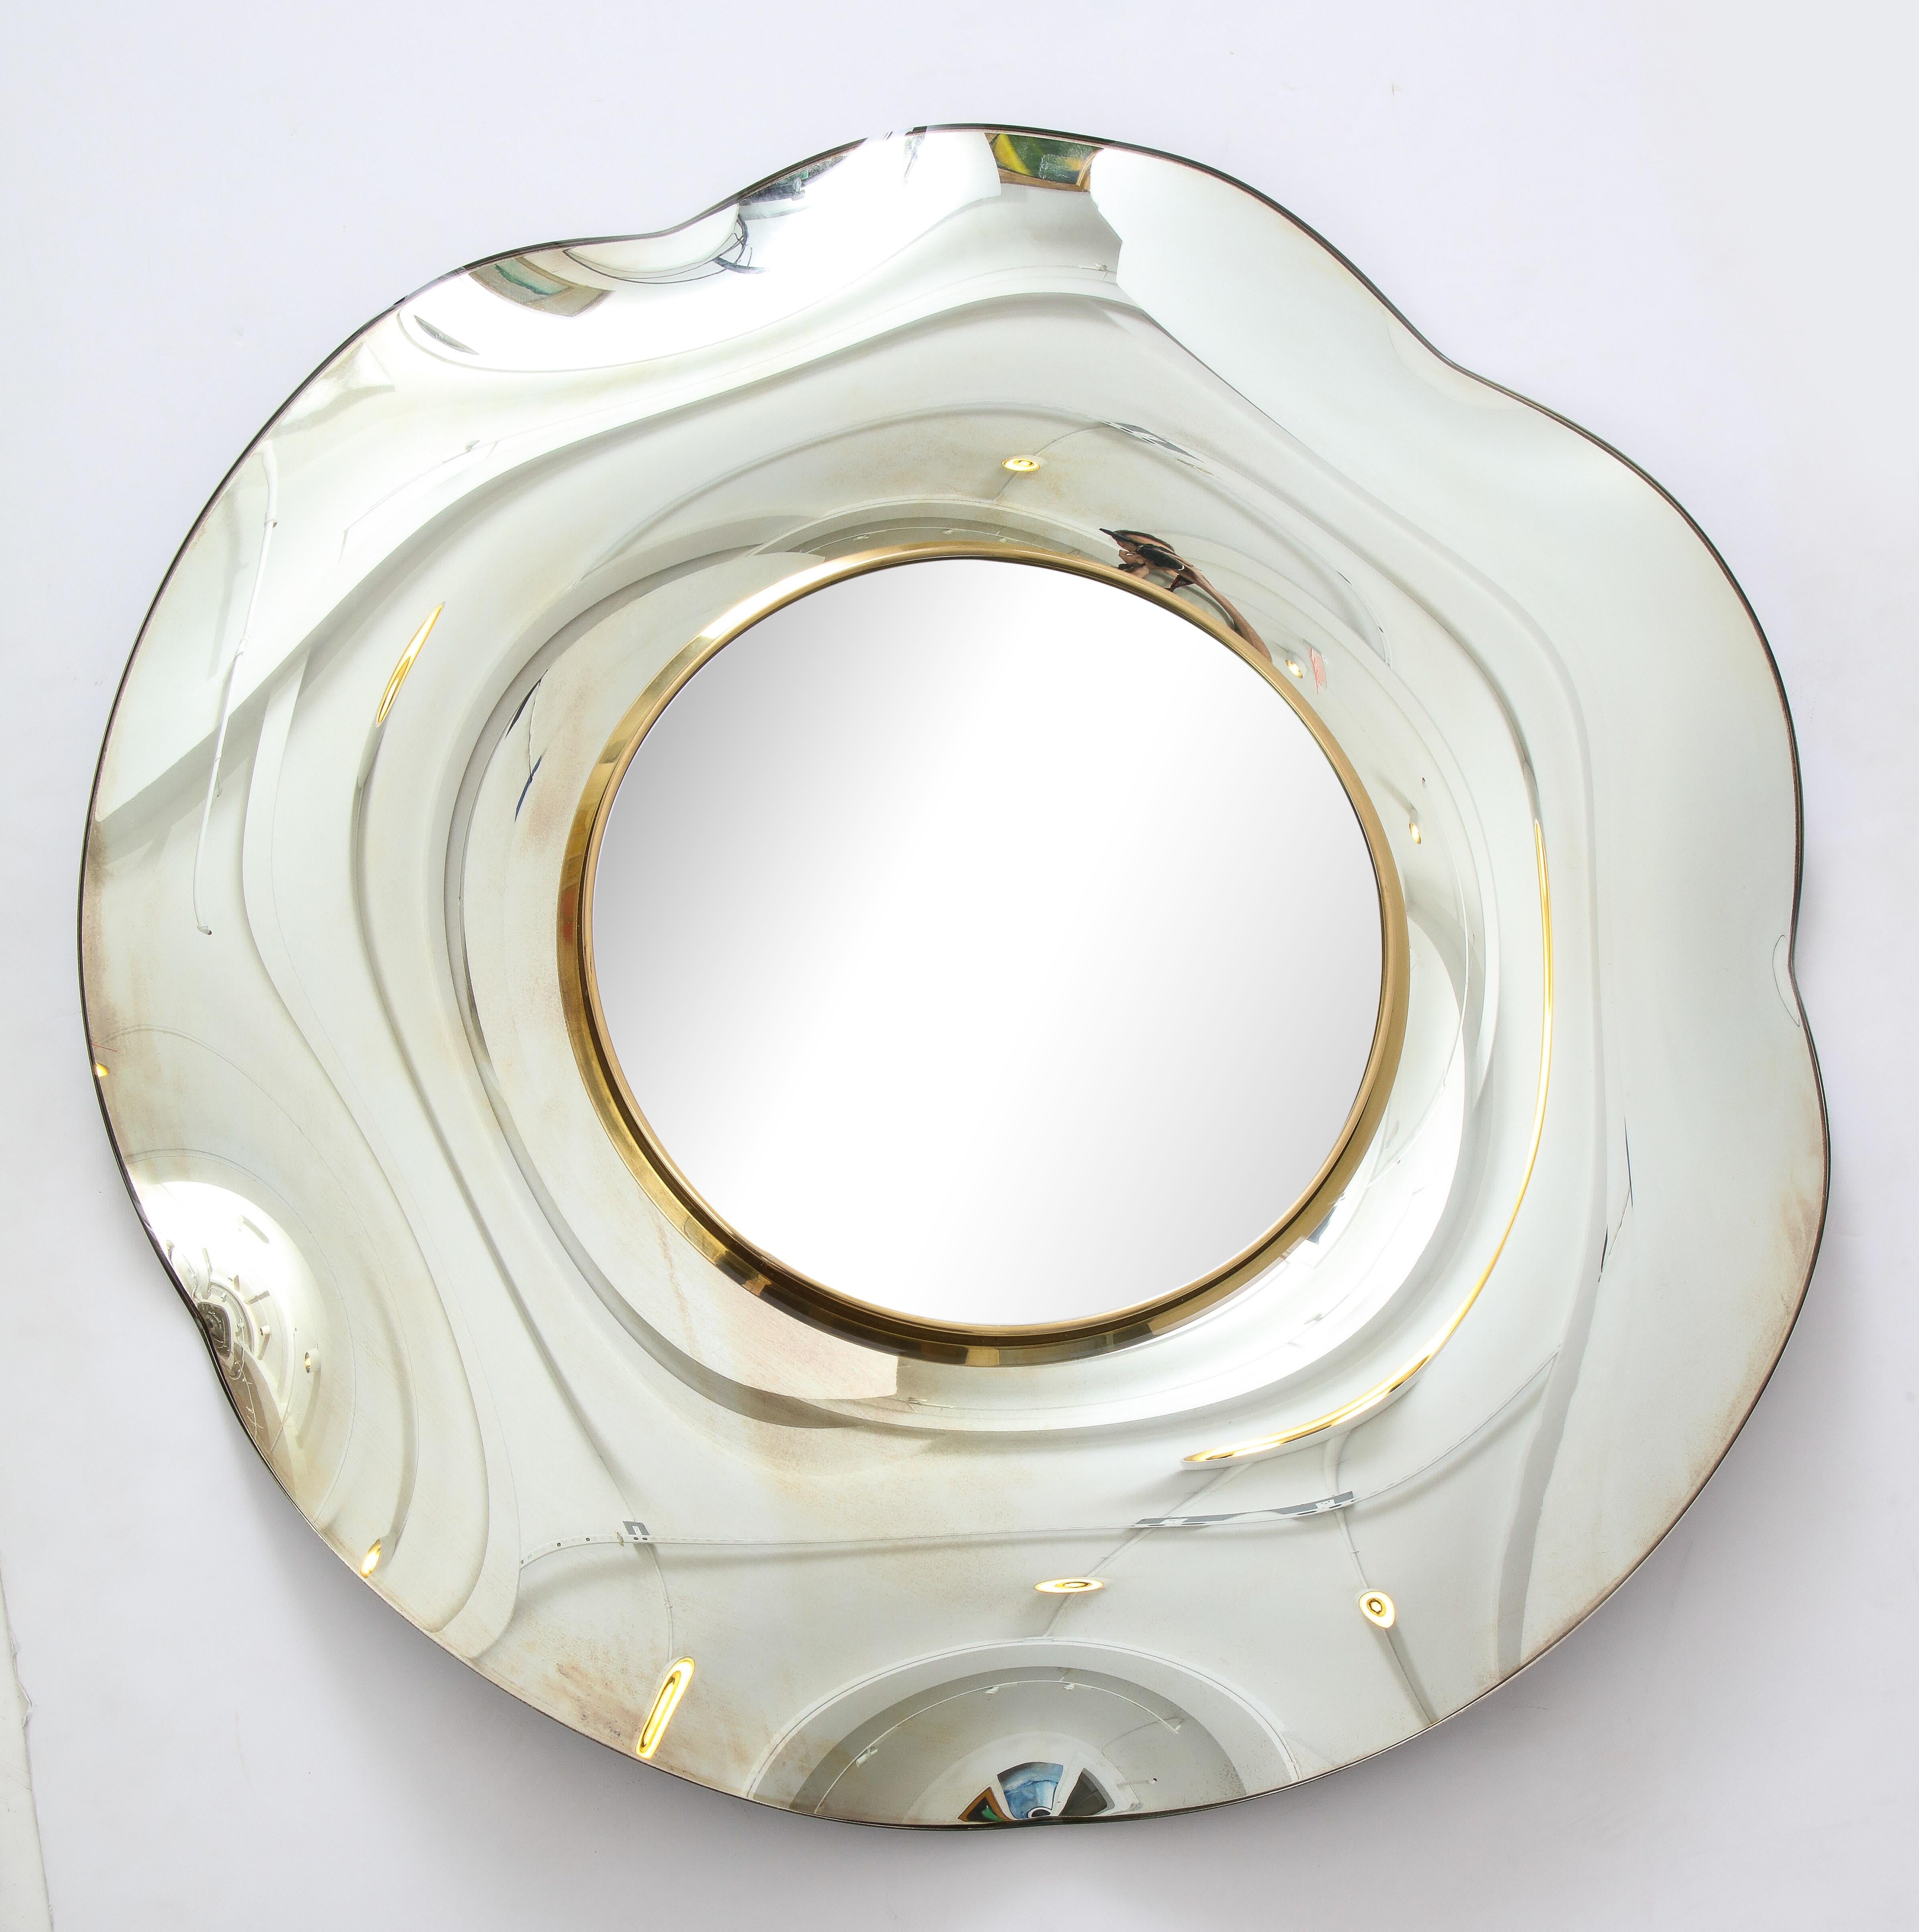 Stunning wave wall mirror by Ghiró studio, beautiful frame with brass detail.